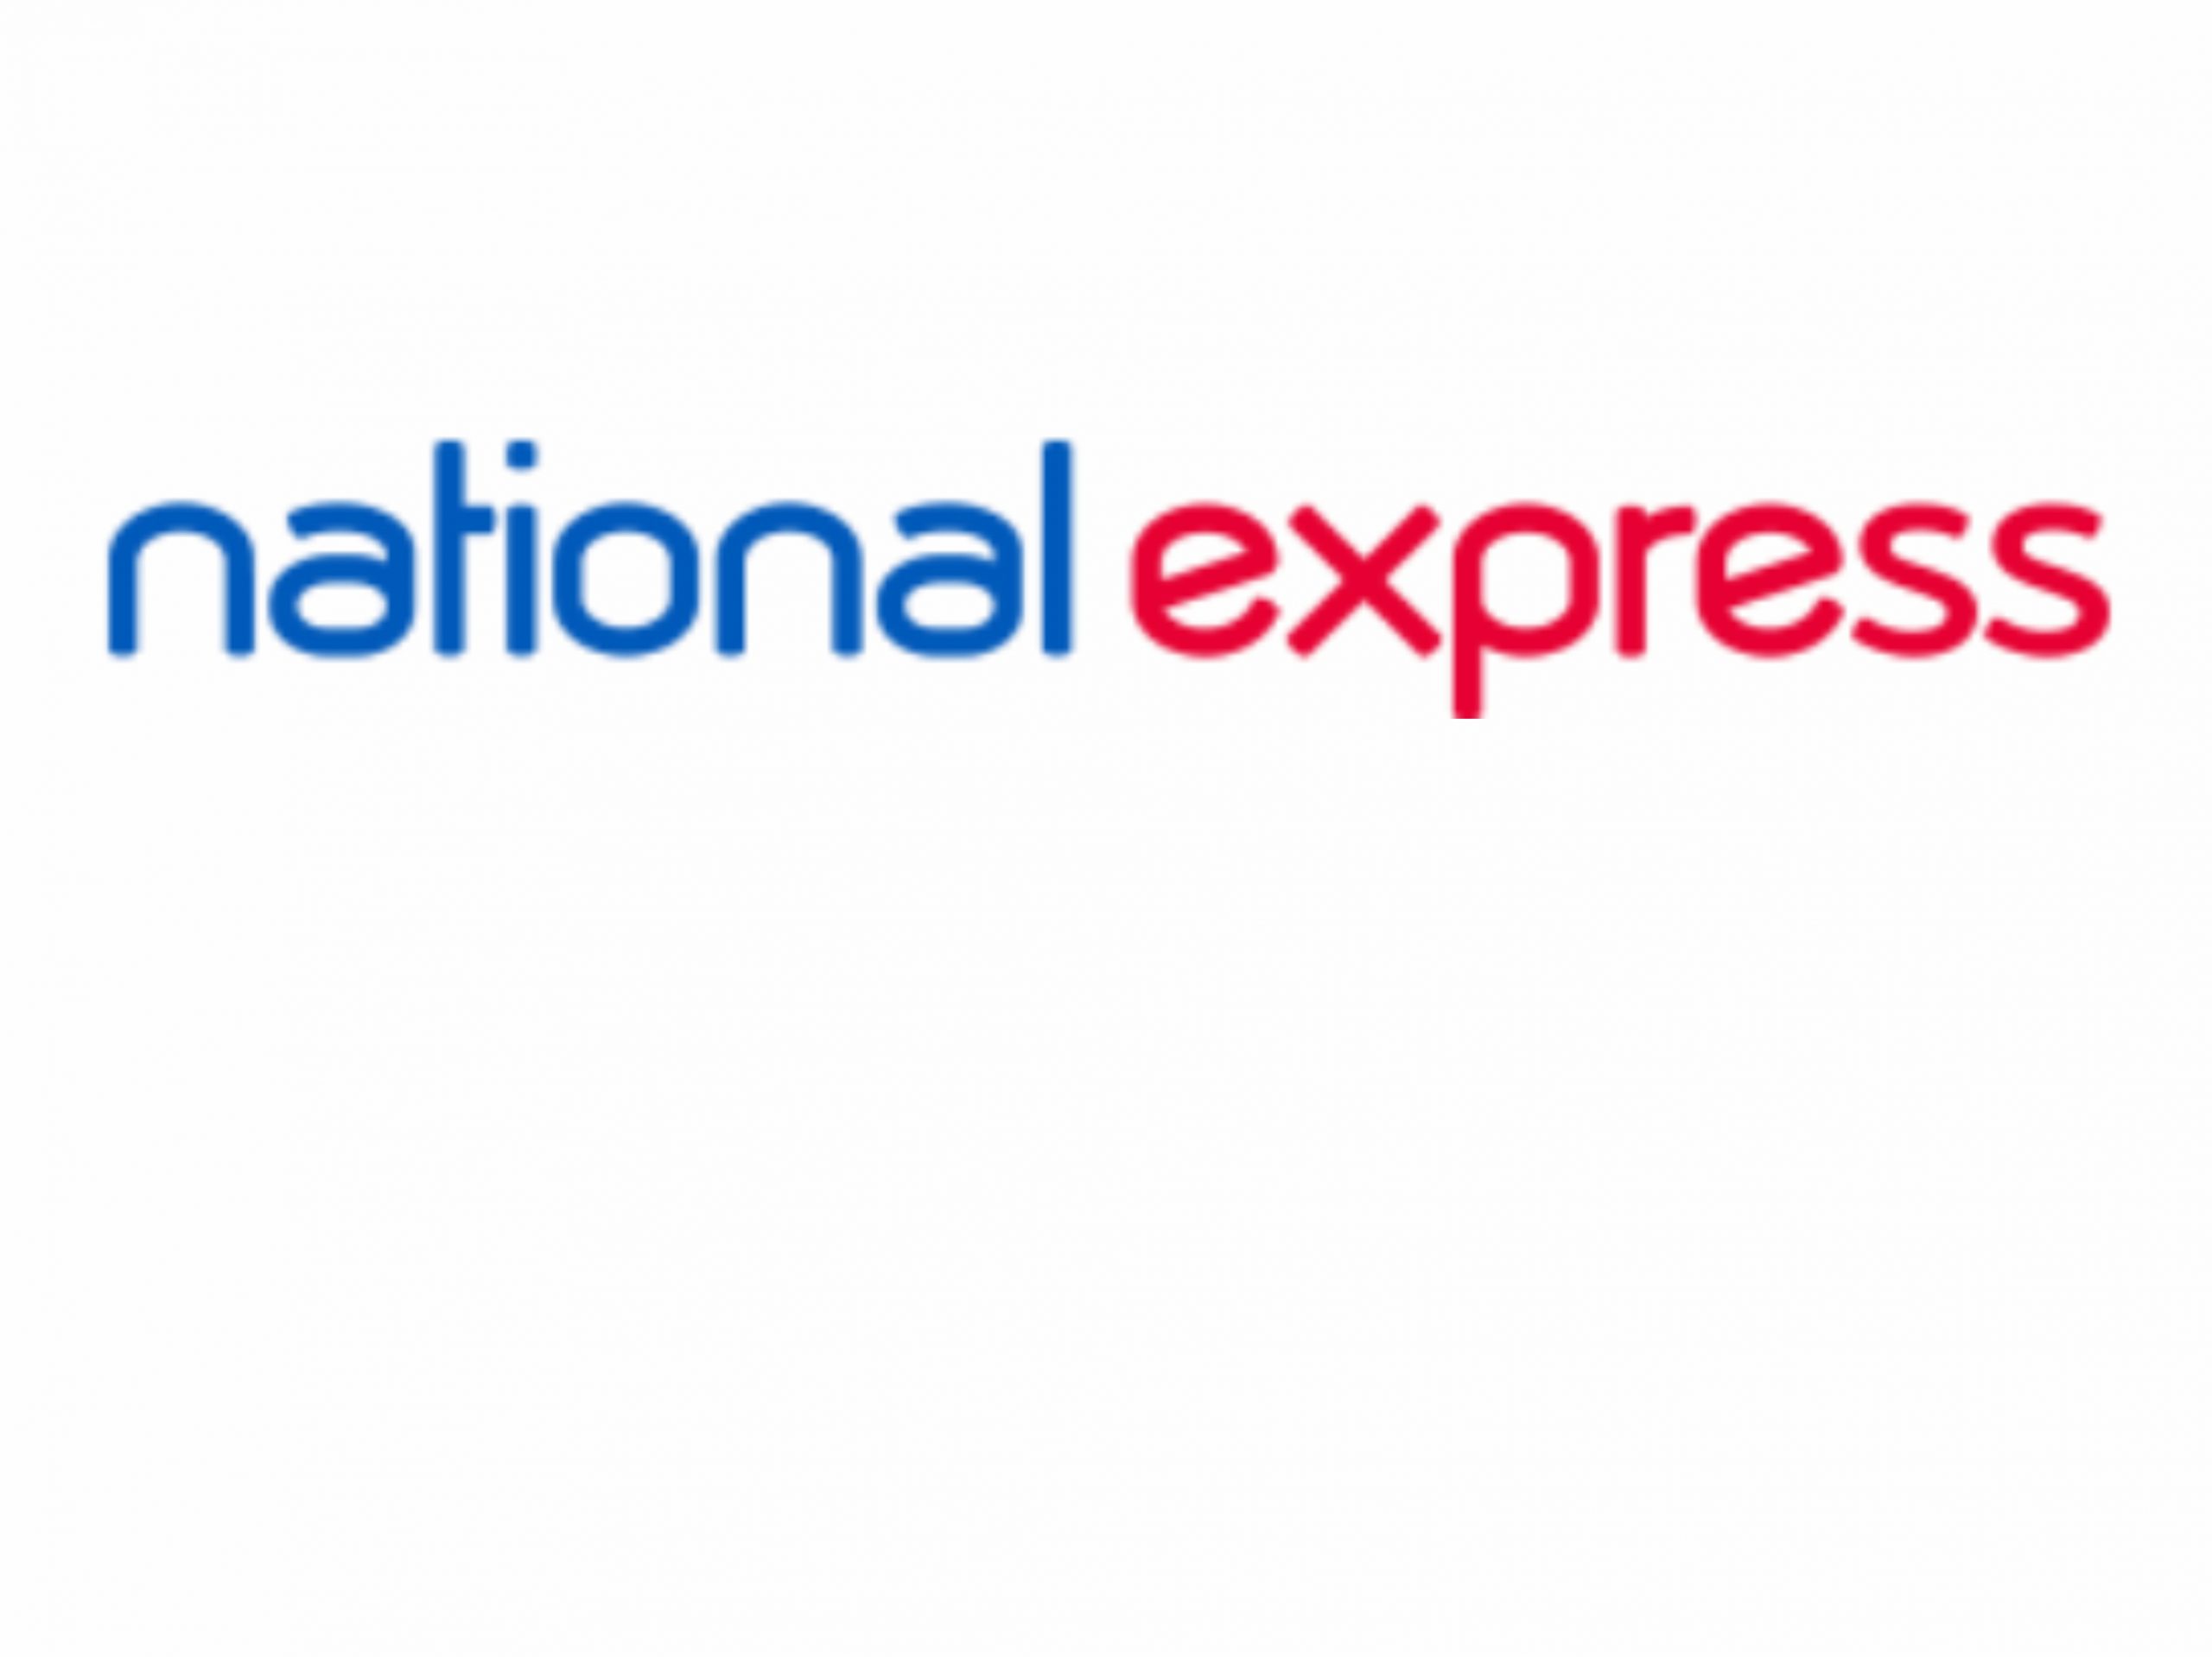 Accessibility and Inclusion with the National Express